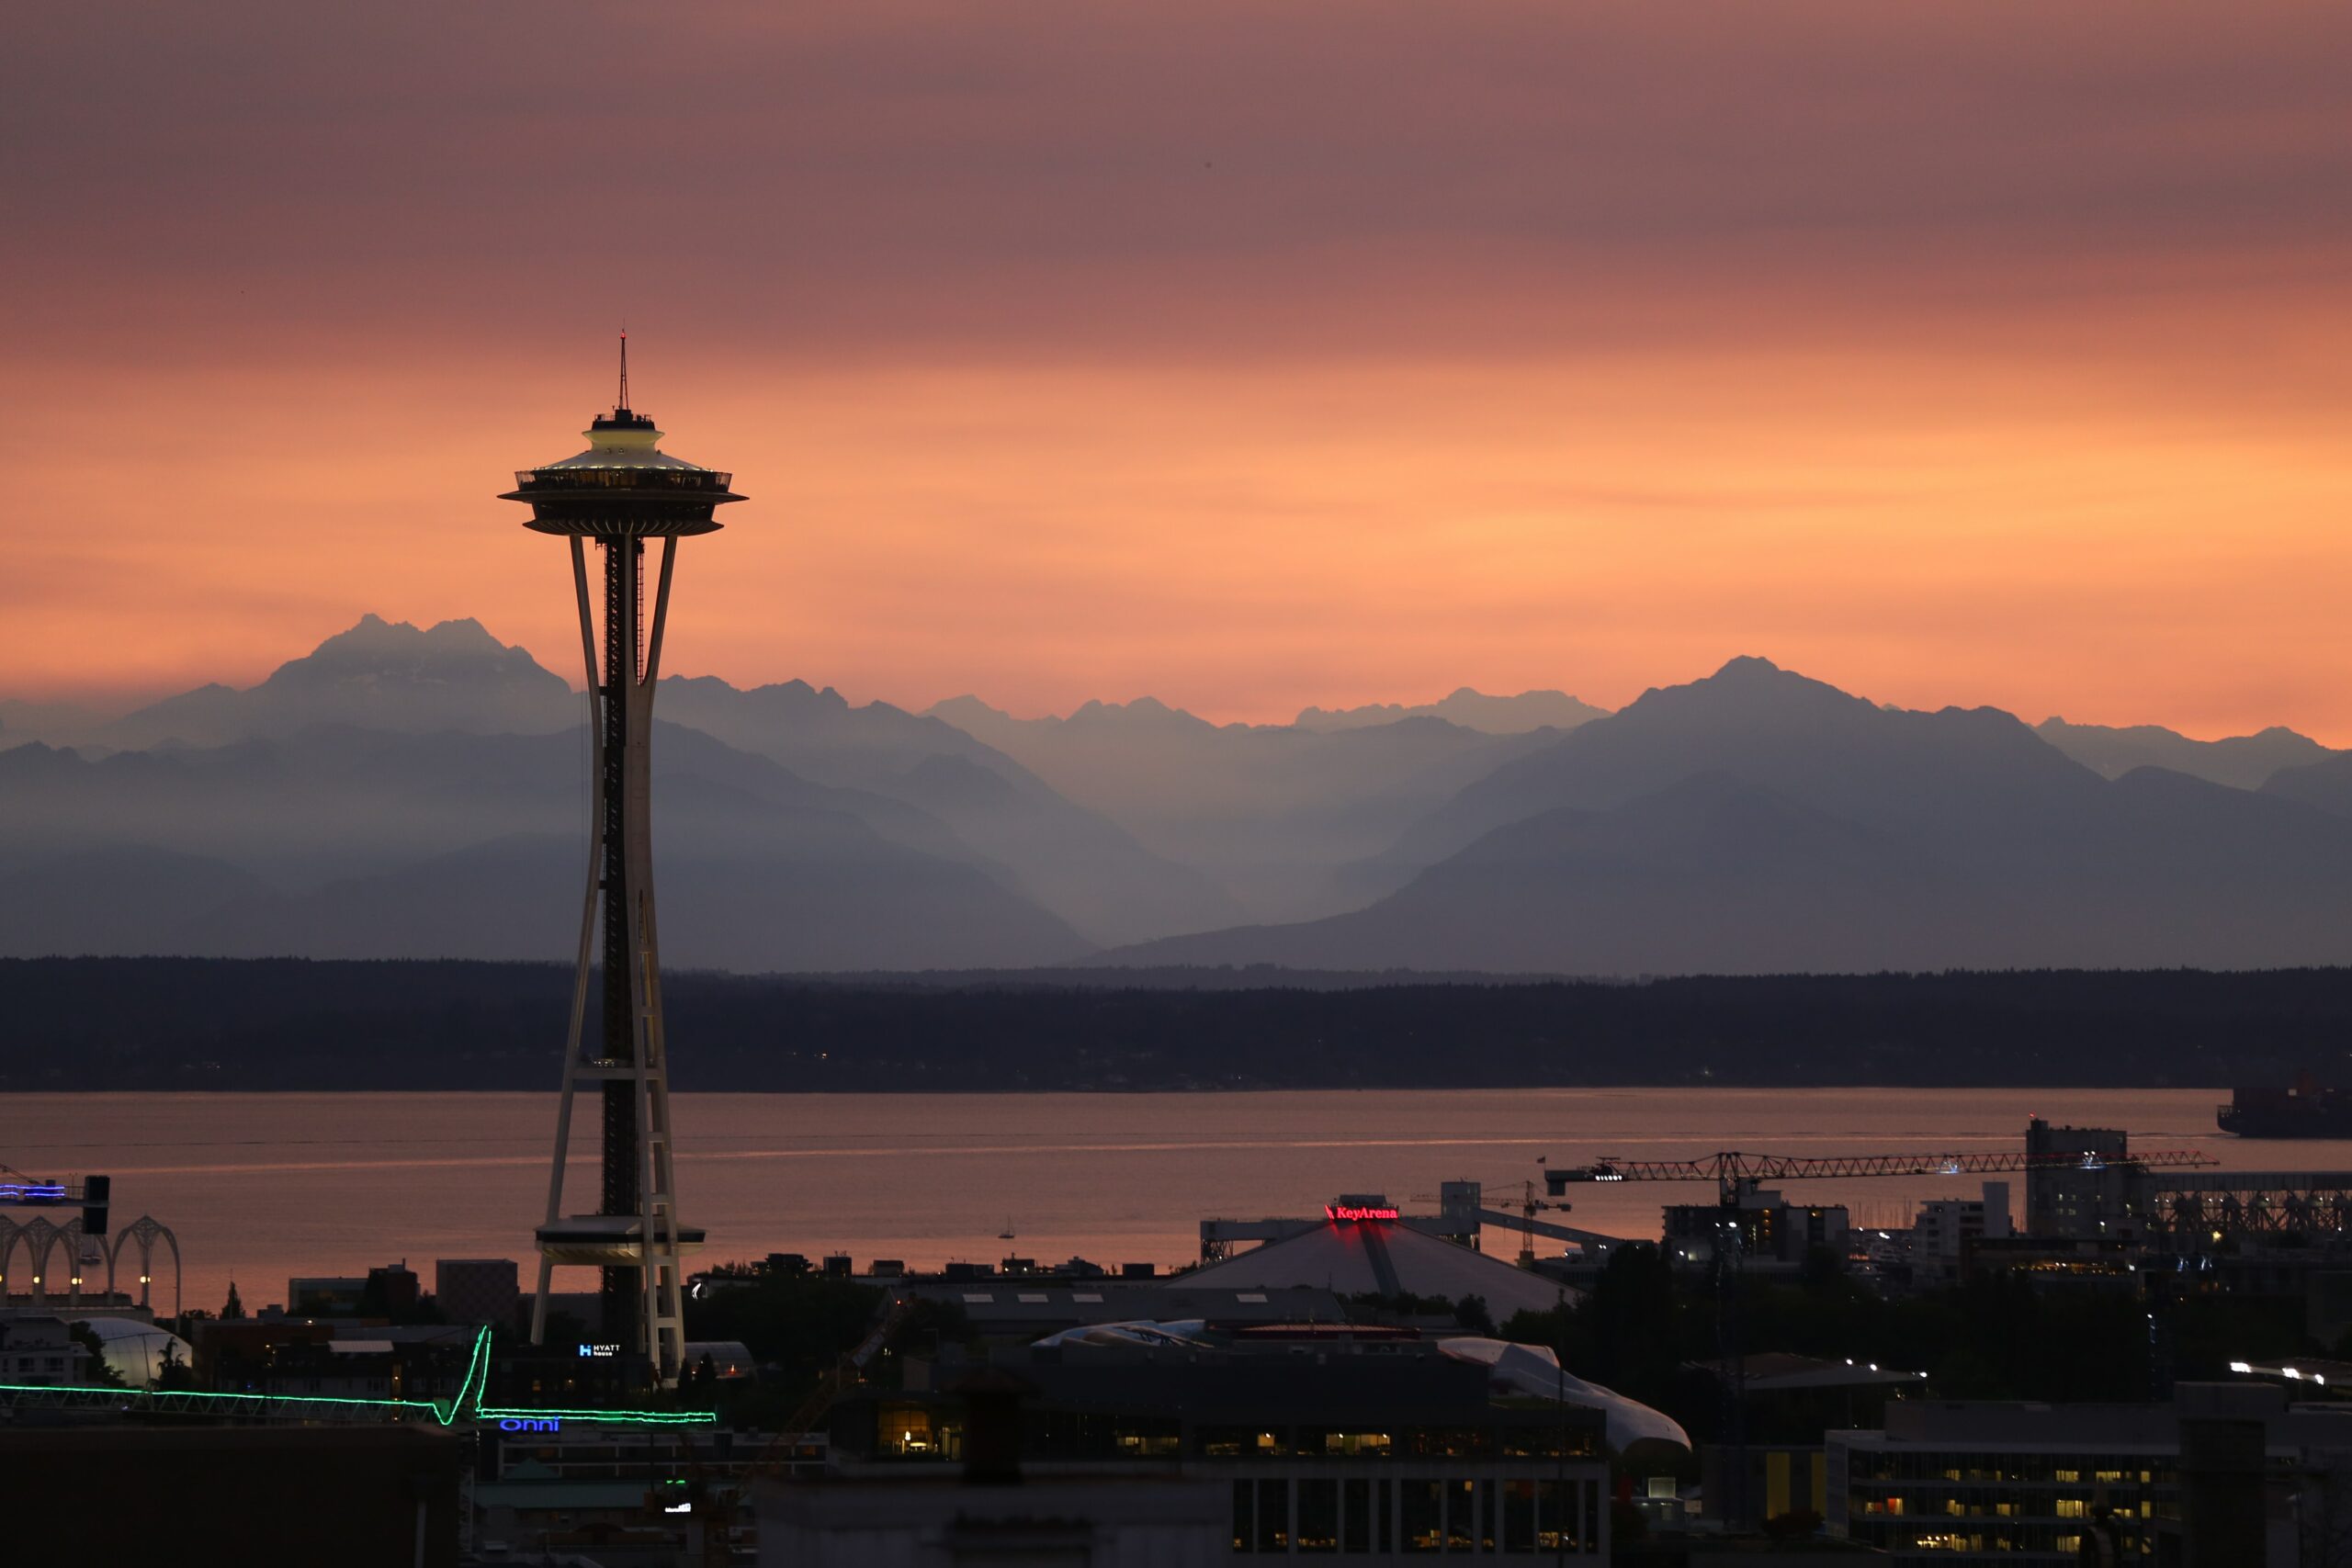 Seattle is one of the cities reaching historically high temperatures. 